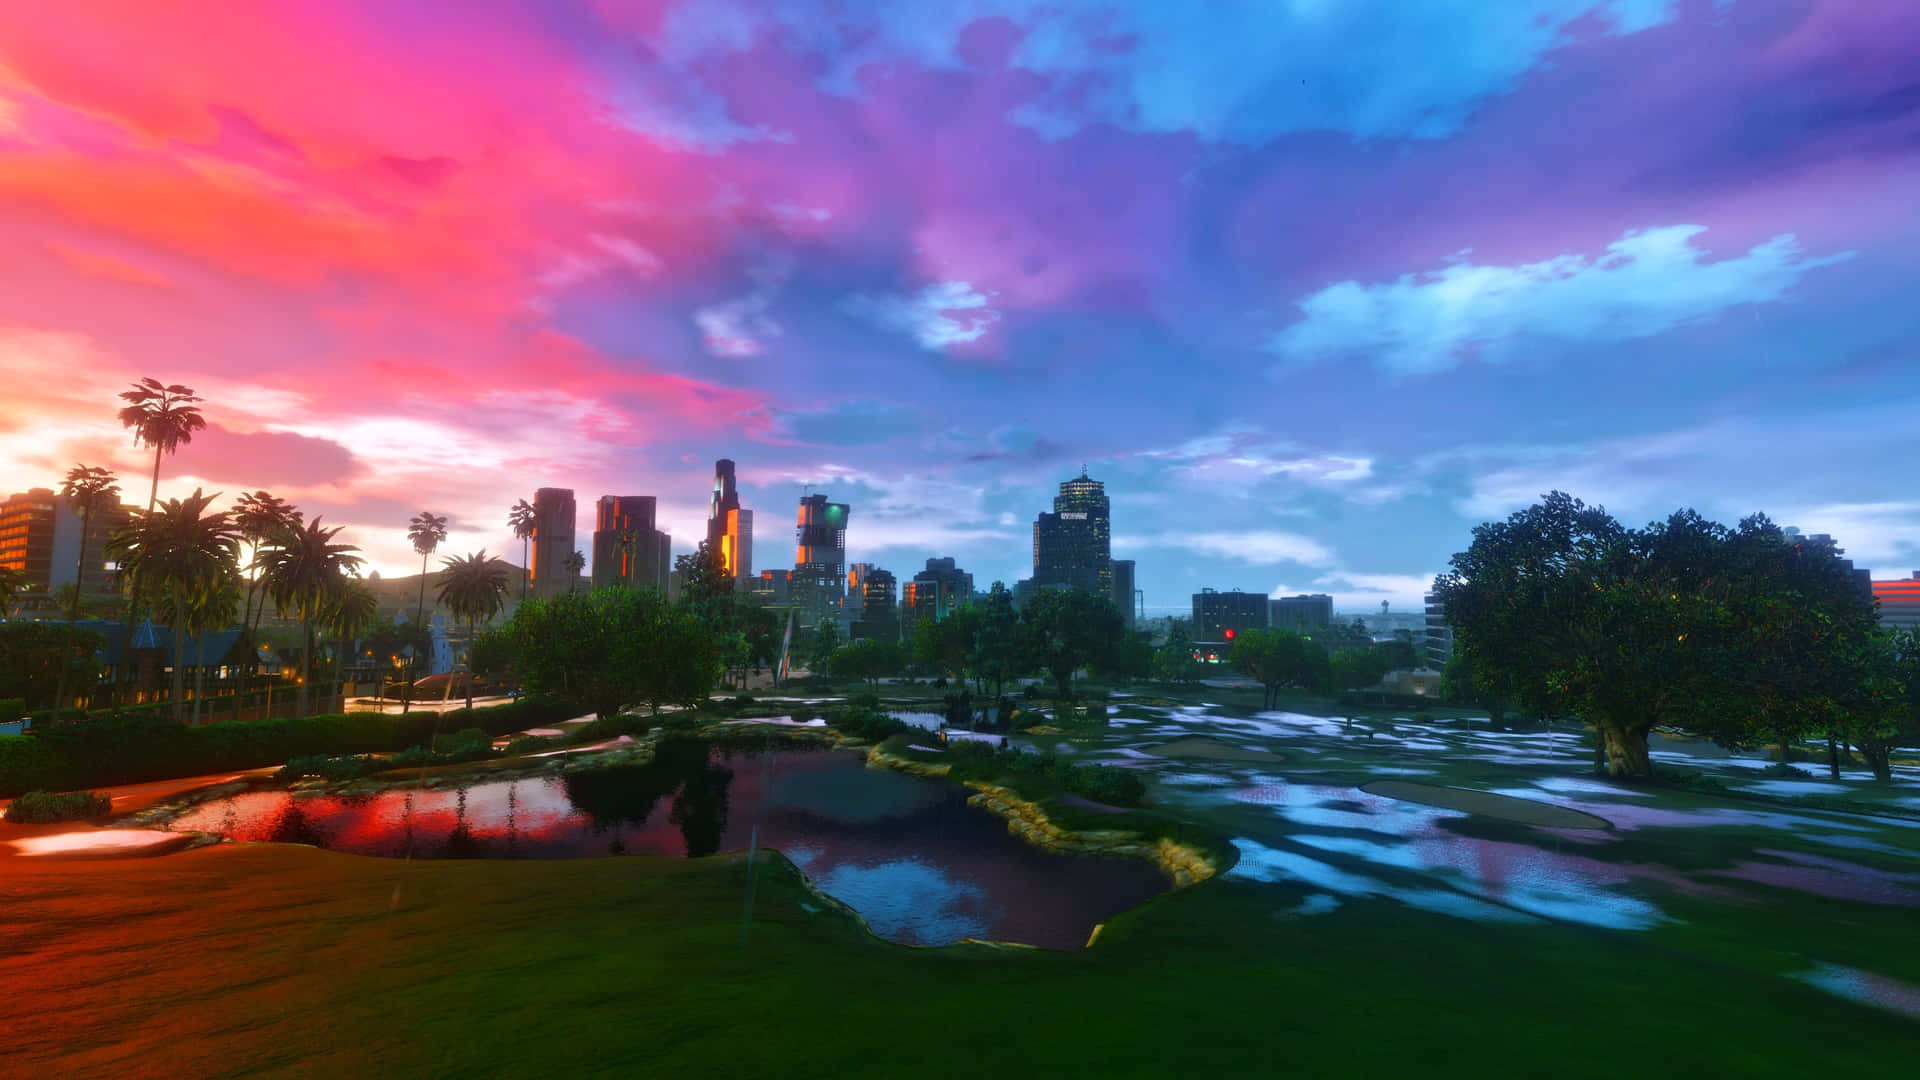 A Colorful Sunset Over A City With A Pond Wallpaper